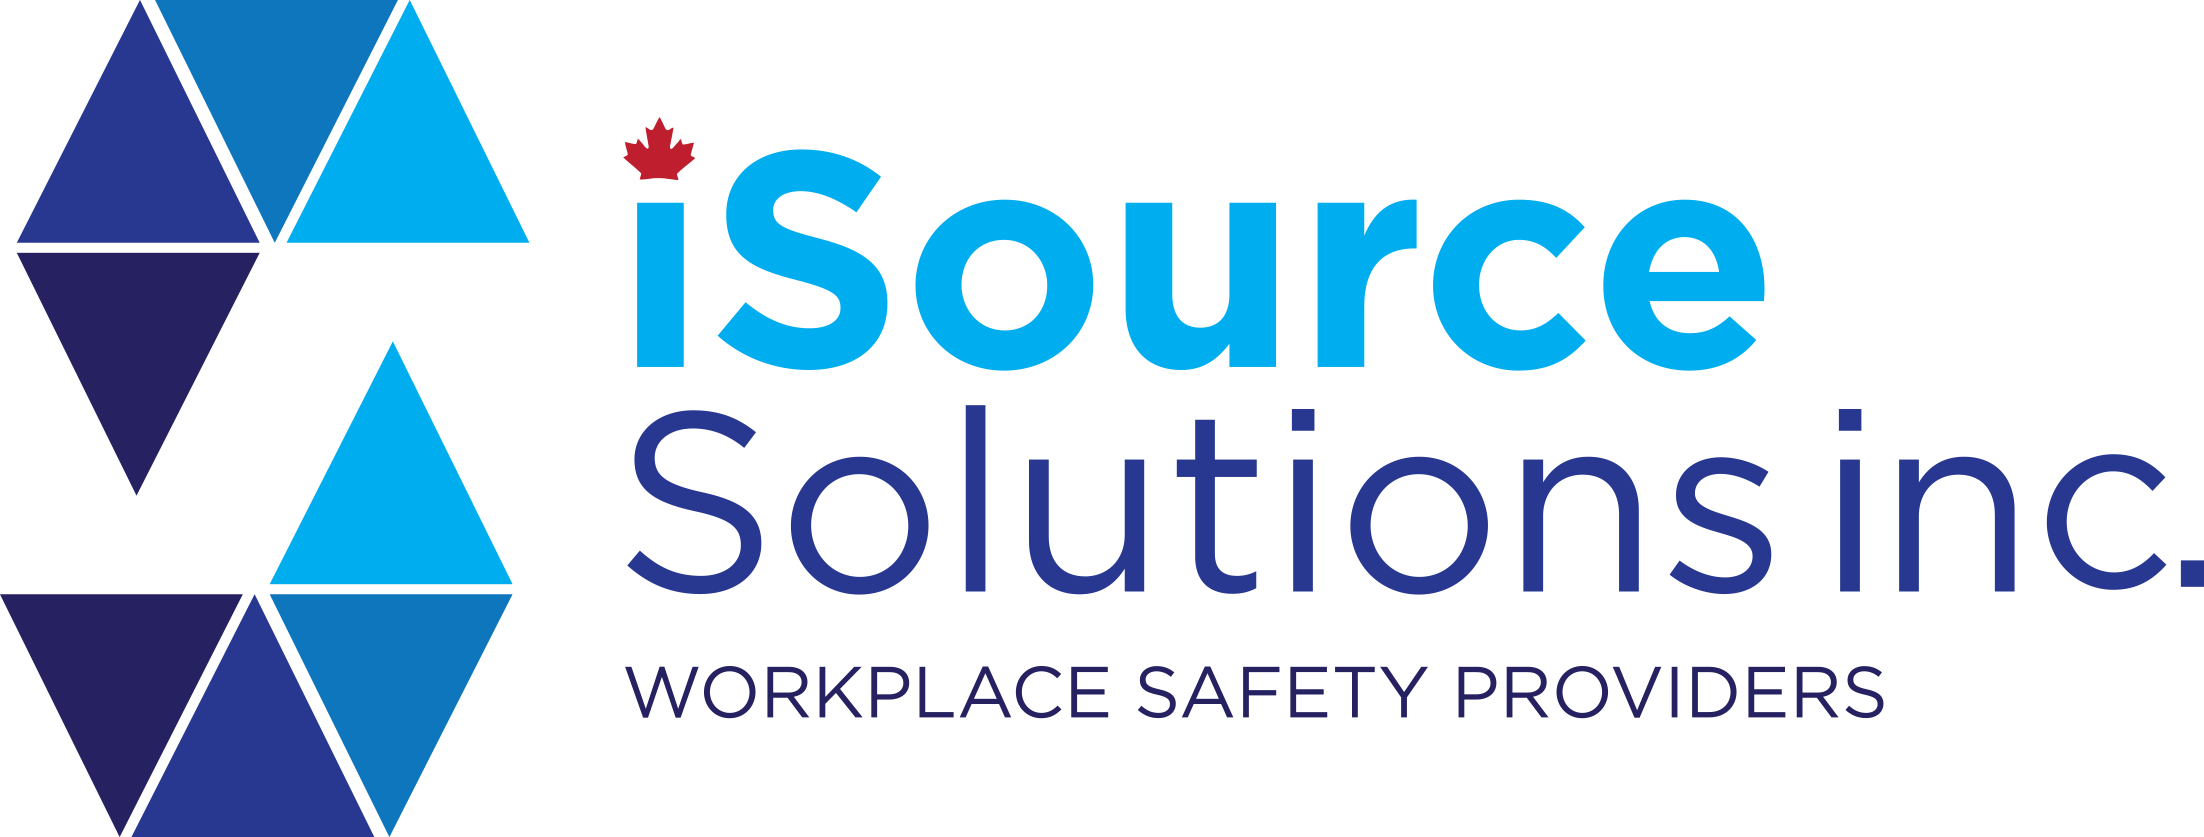 iSource Solutions Inc